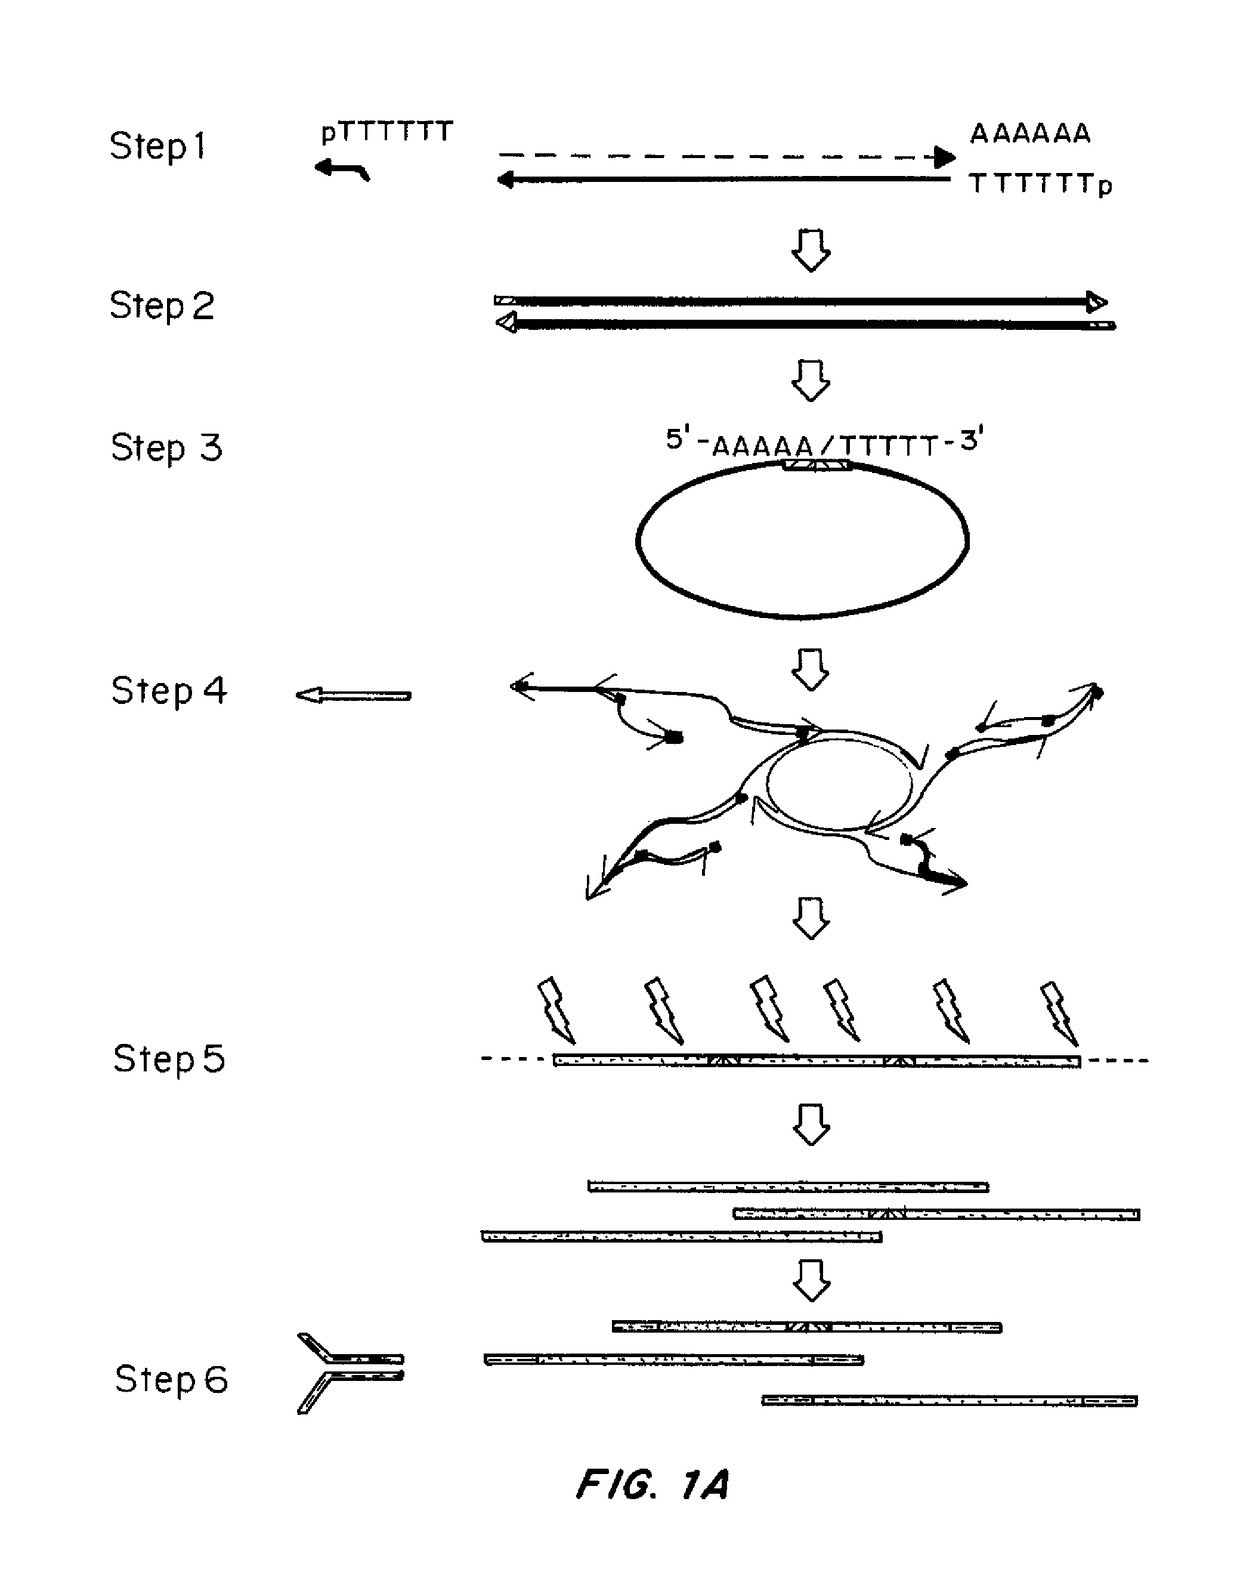 Methods for preparing cDNA from low quantities of cells